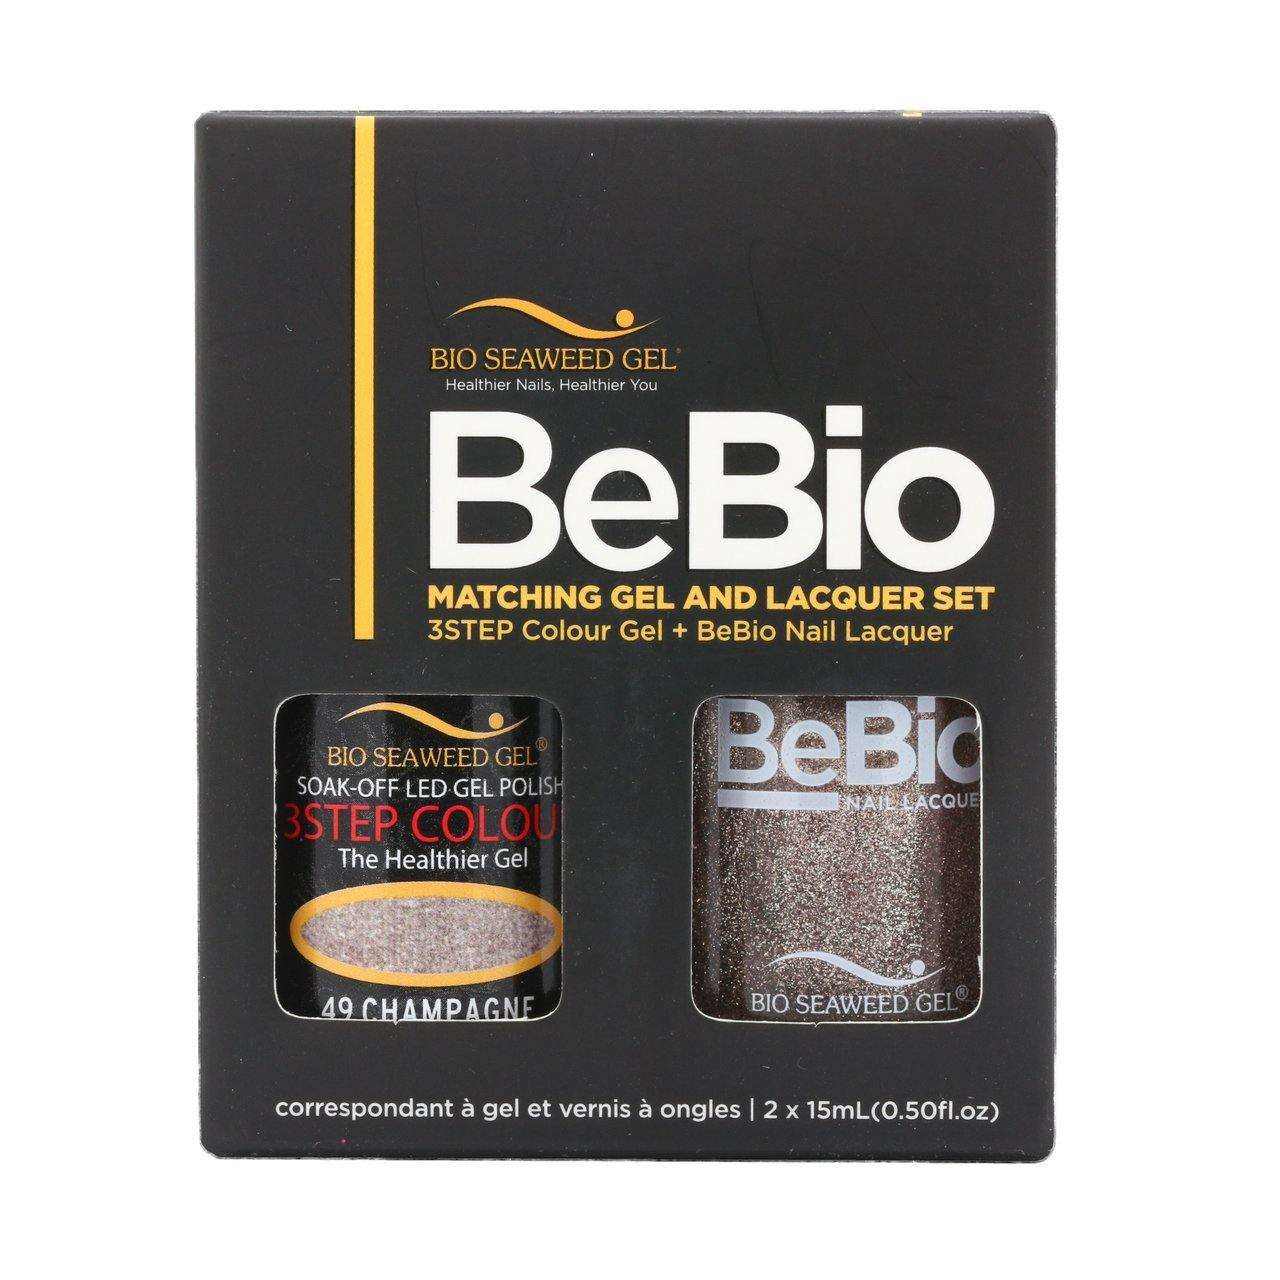 Bio Seaweed Gel 3Step Duo - Gel & Lacquer Combo - 49 CHAMPAGNE